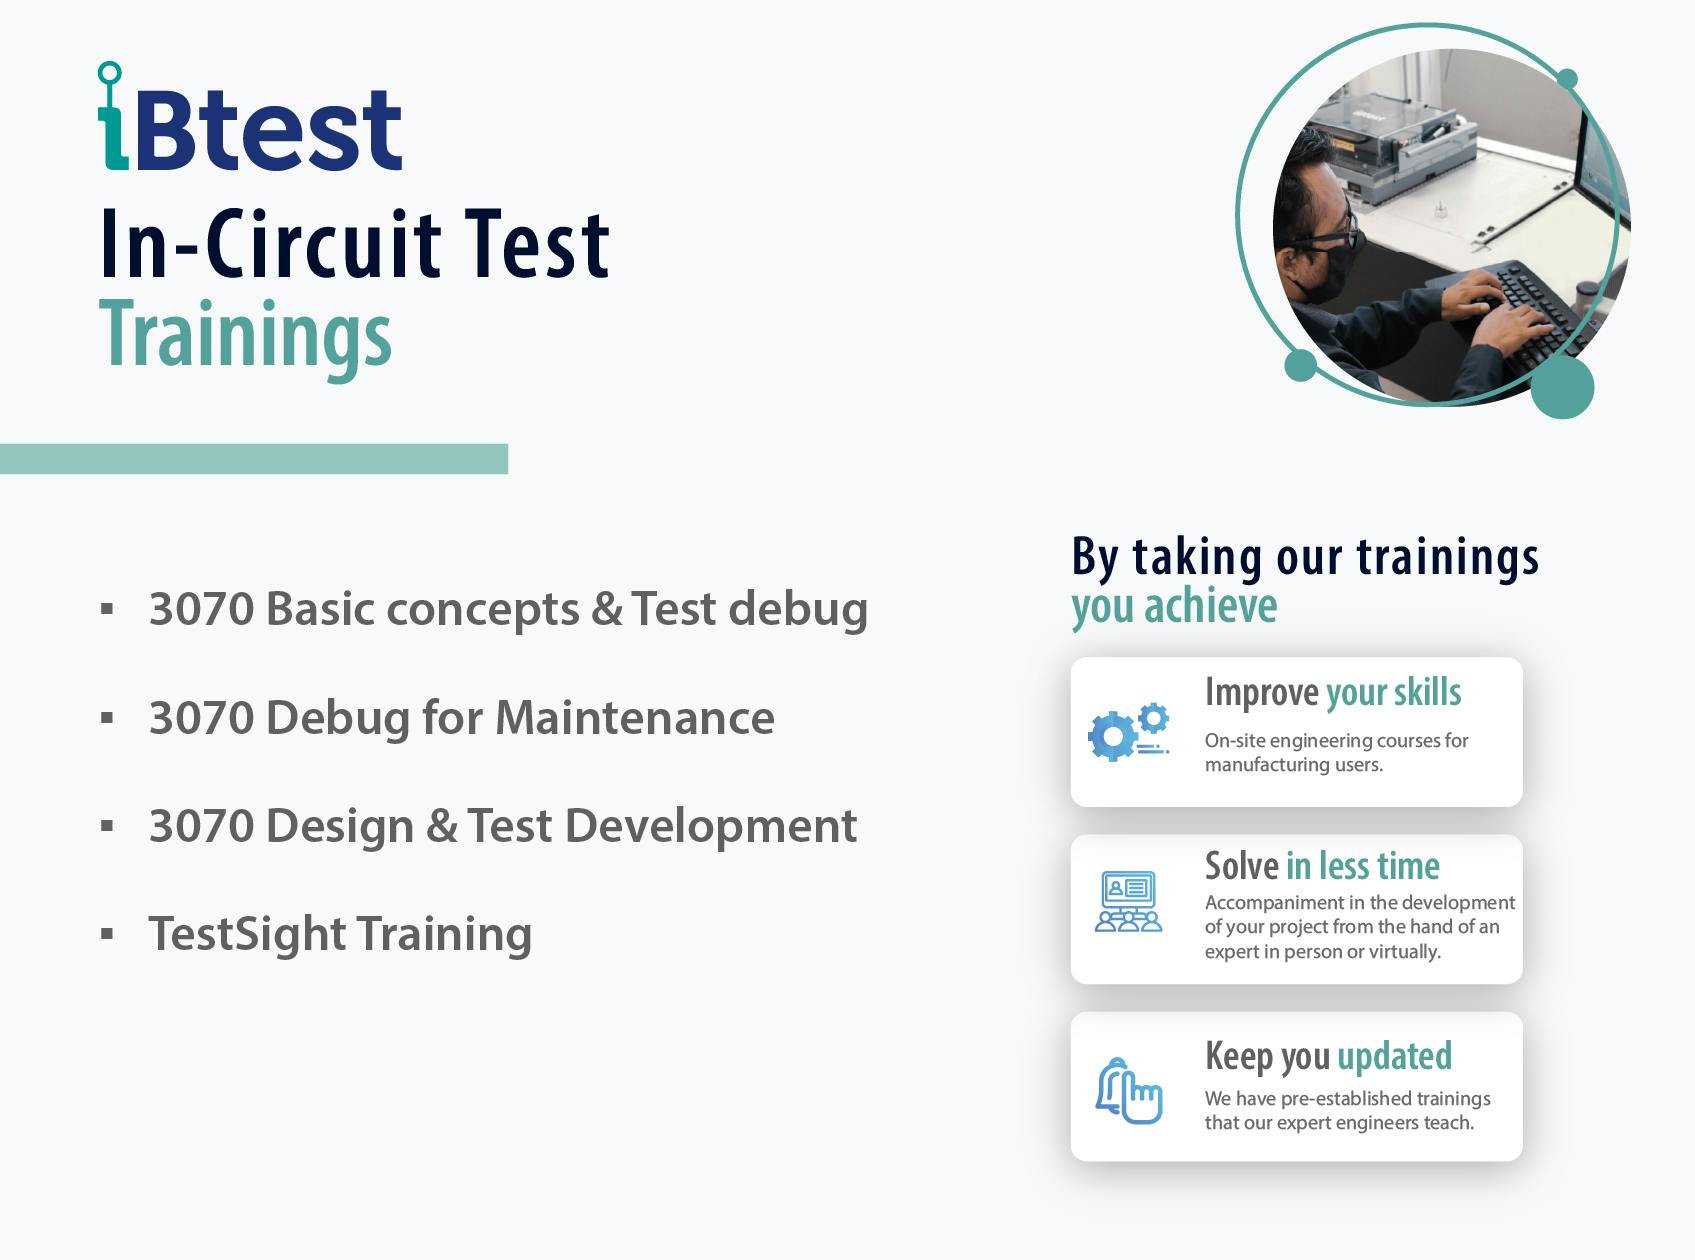 Training for face-to-face and virtual in-circuit tests